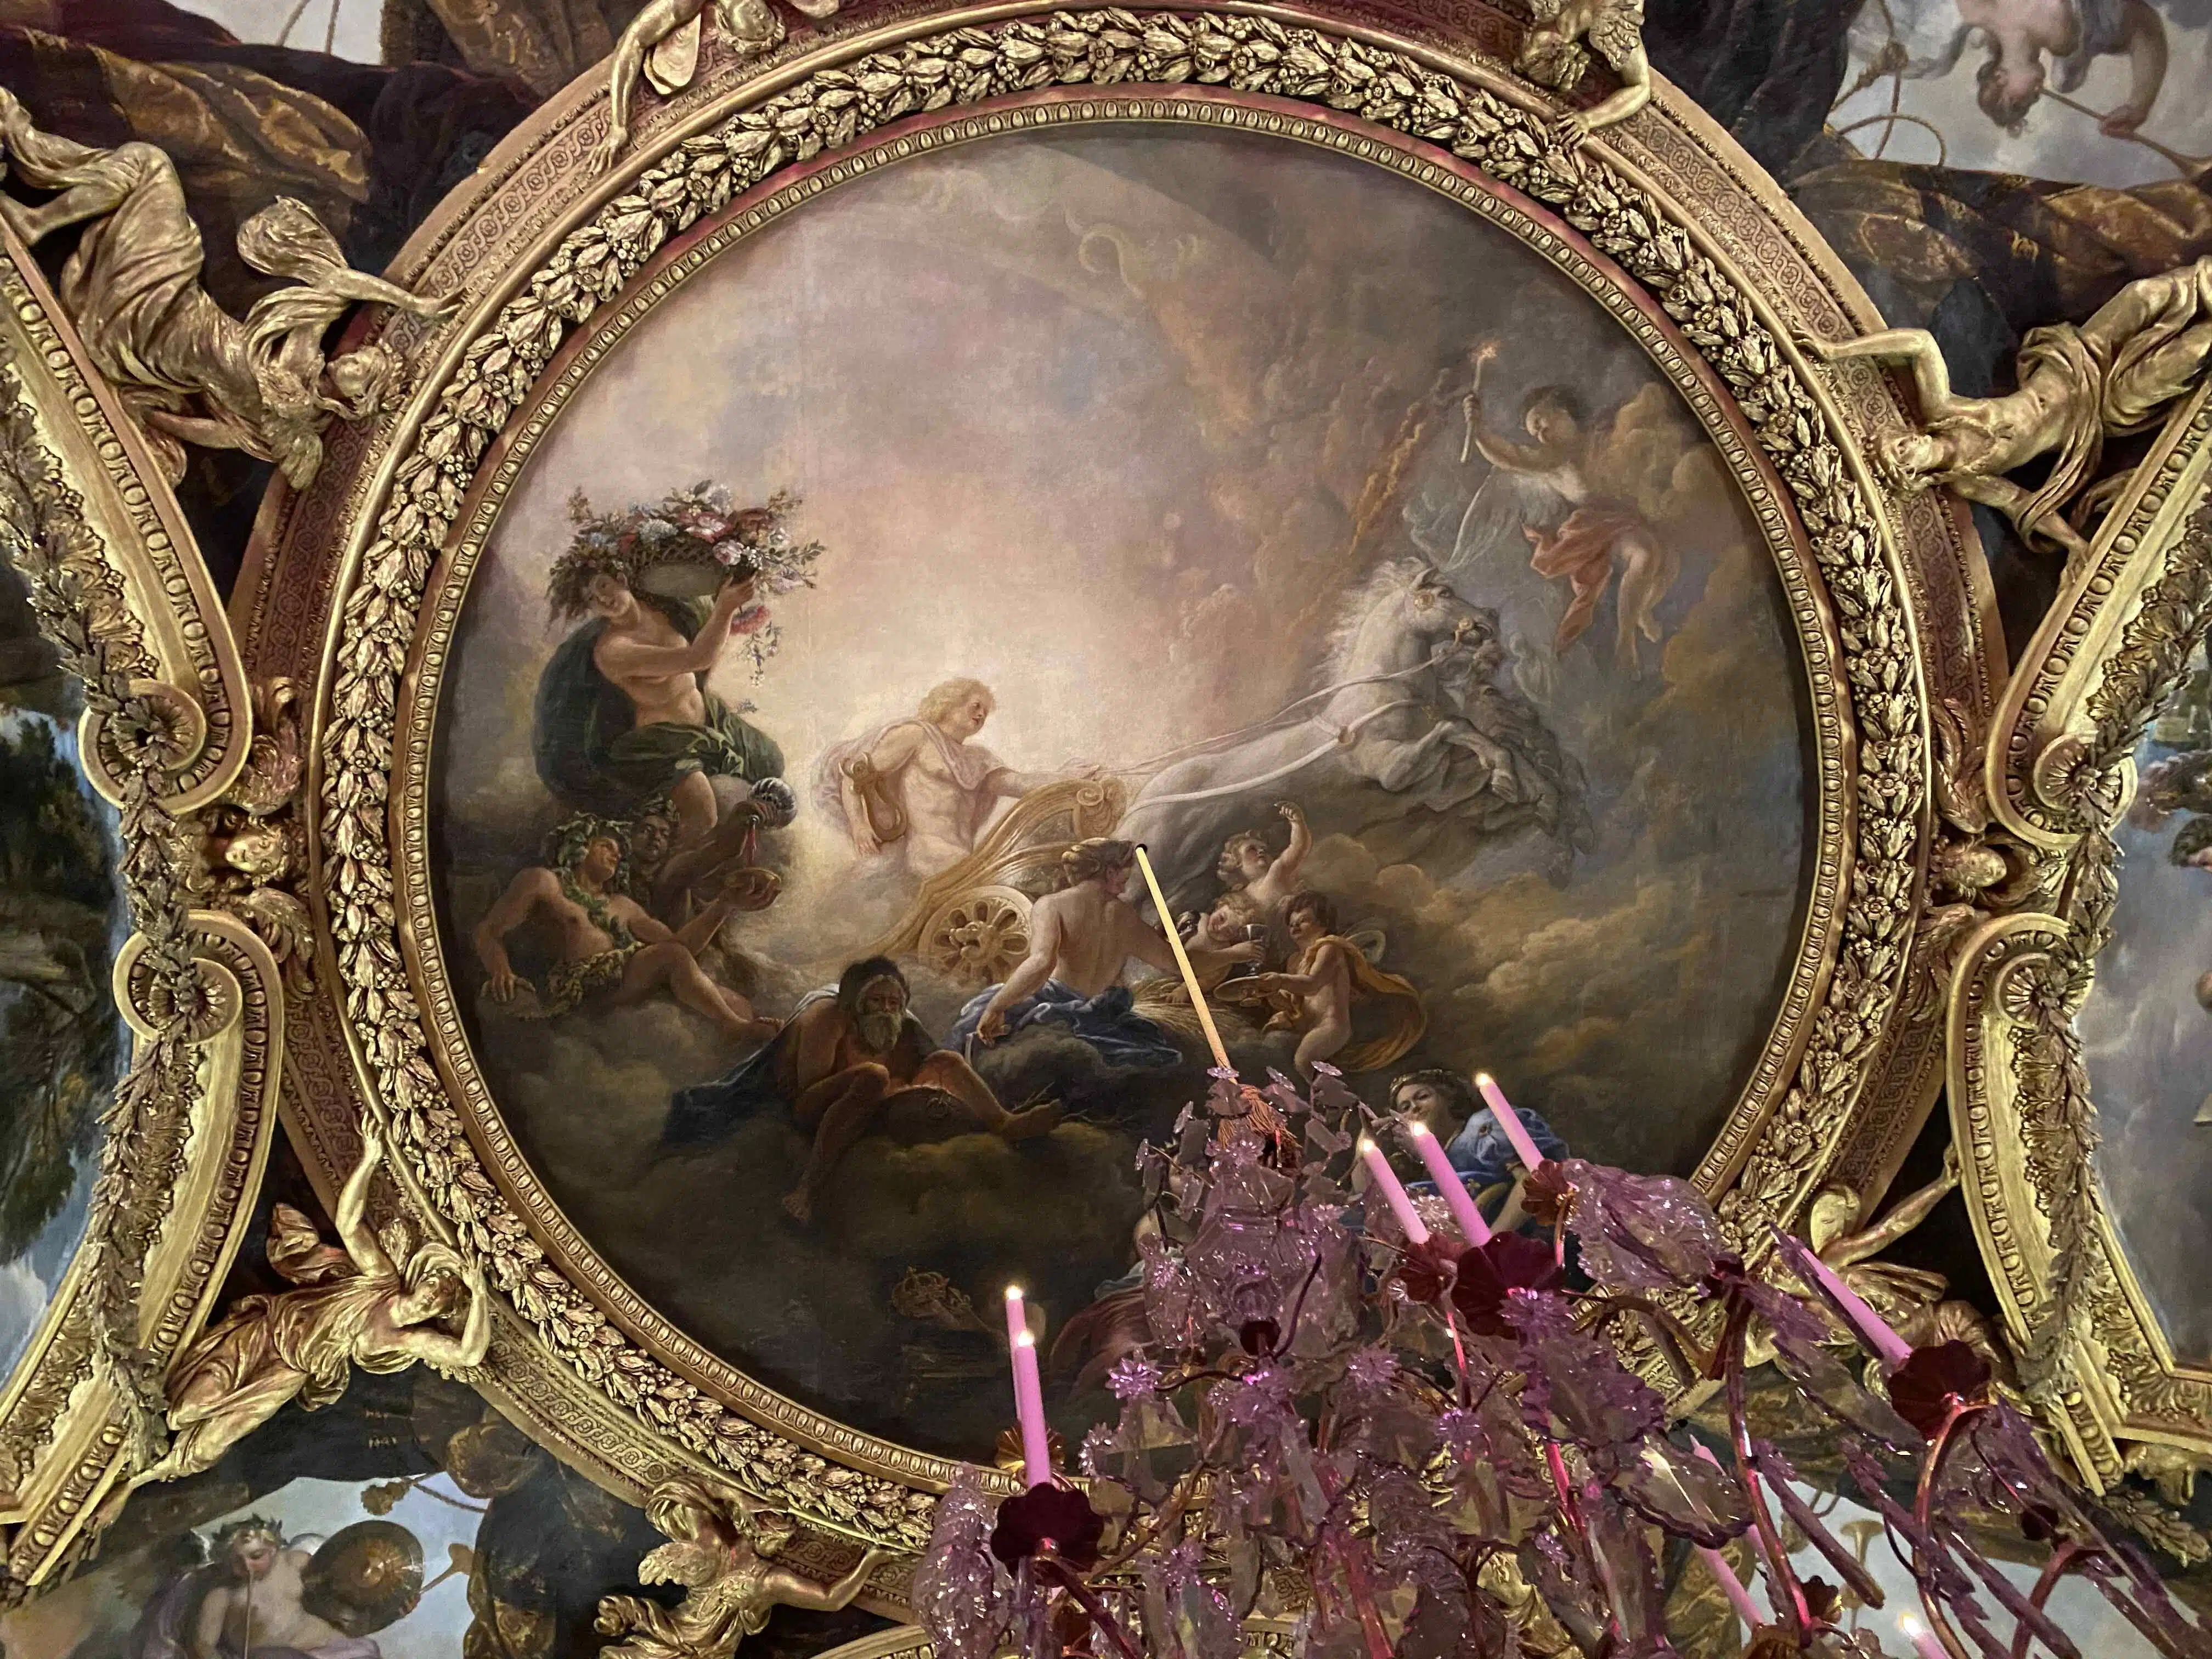 Greek god Apollo riding a chariot on a ceiling at Versailles palace.